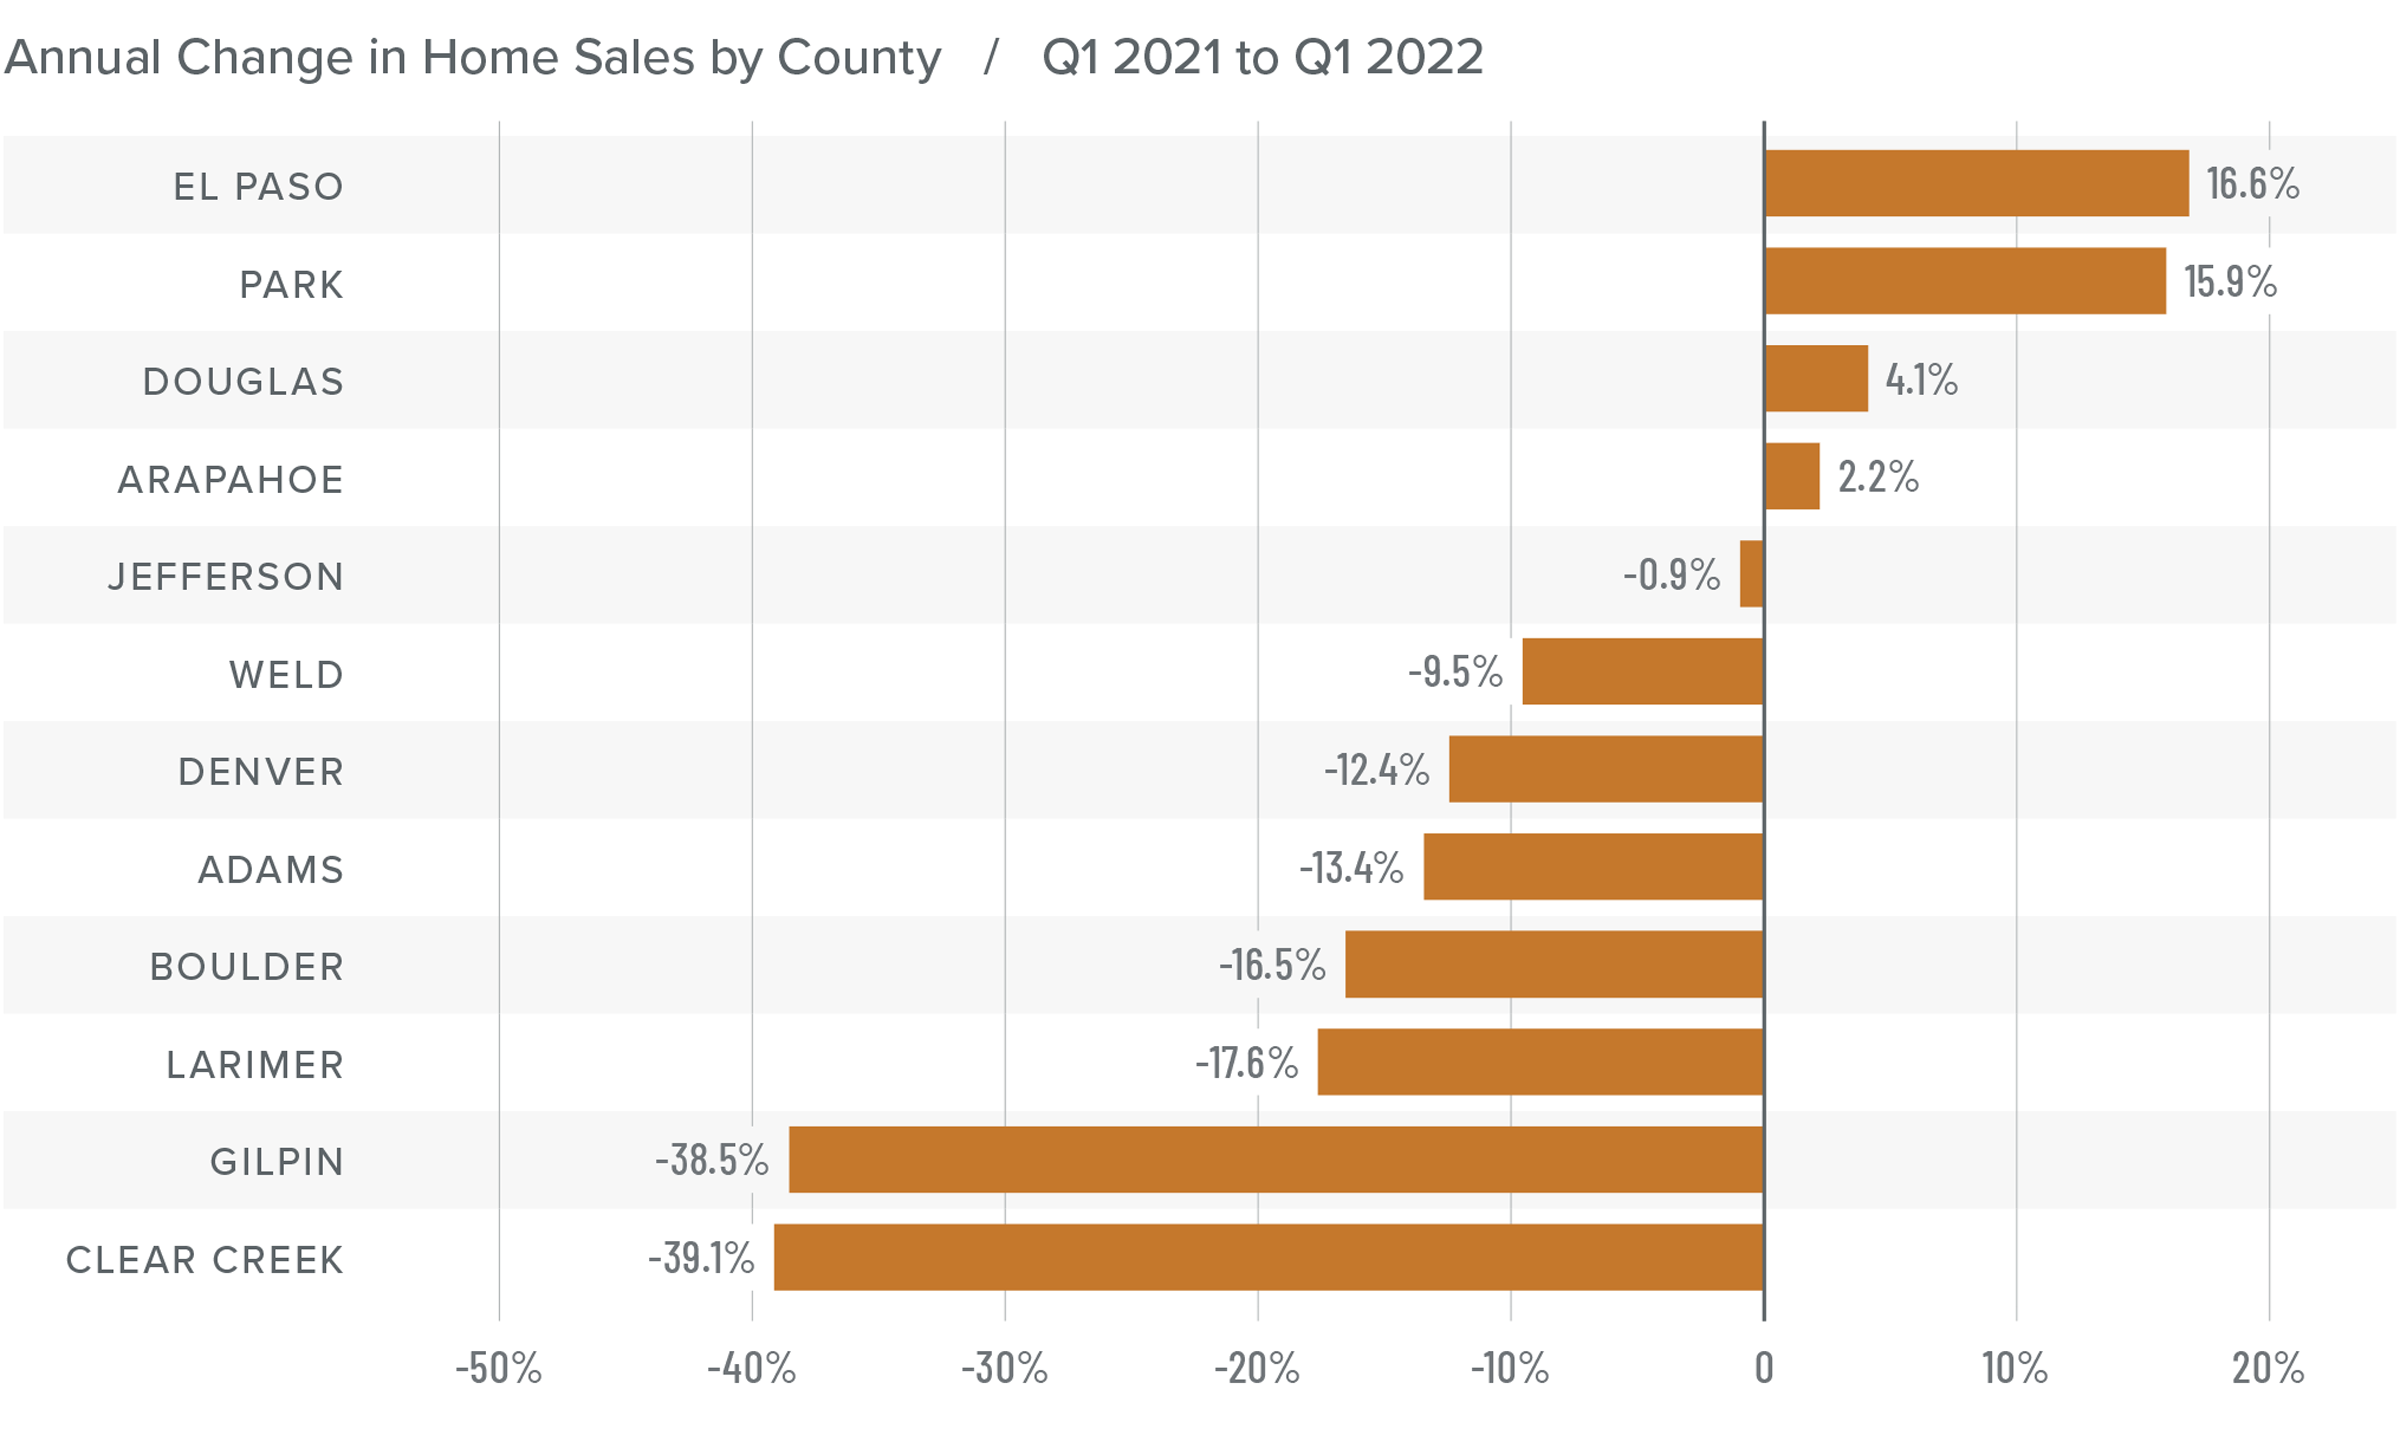 A bar graph showing the annual change in home sales for various counties in Colorado between Q1 2021 and Q1 2022.